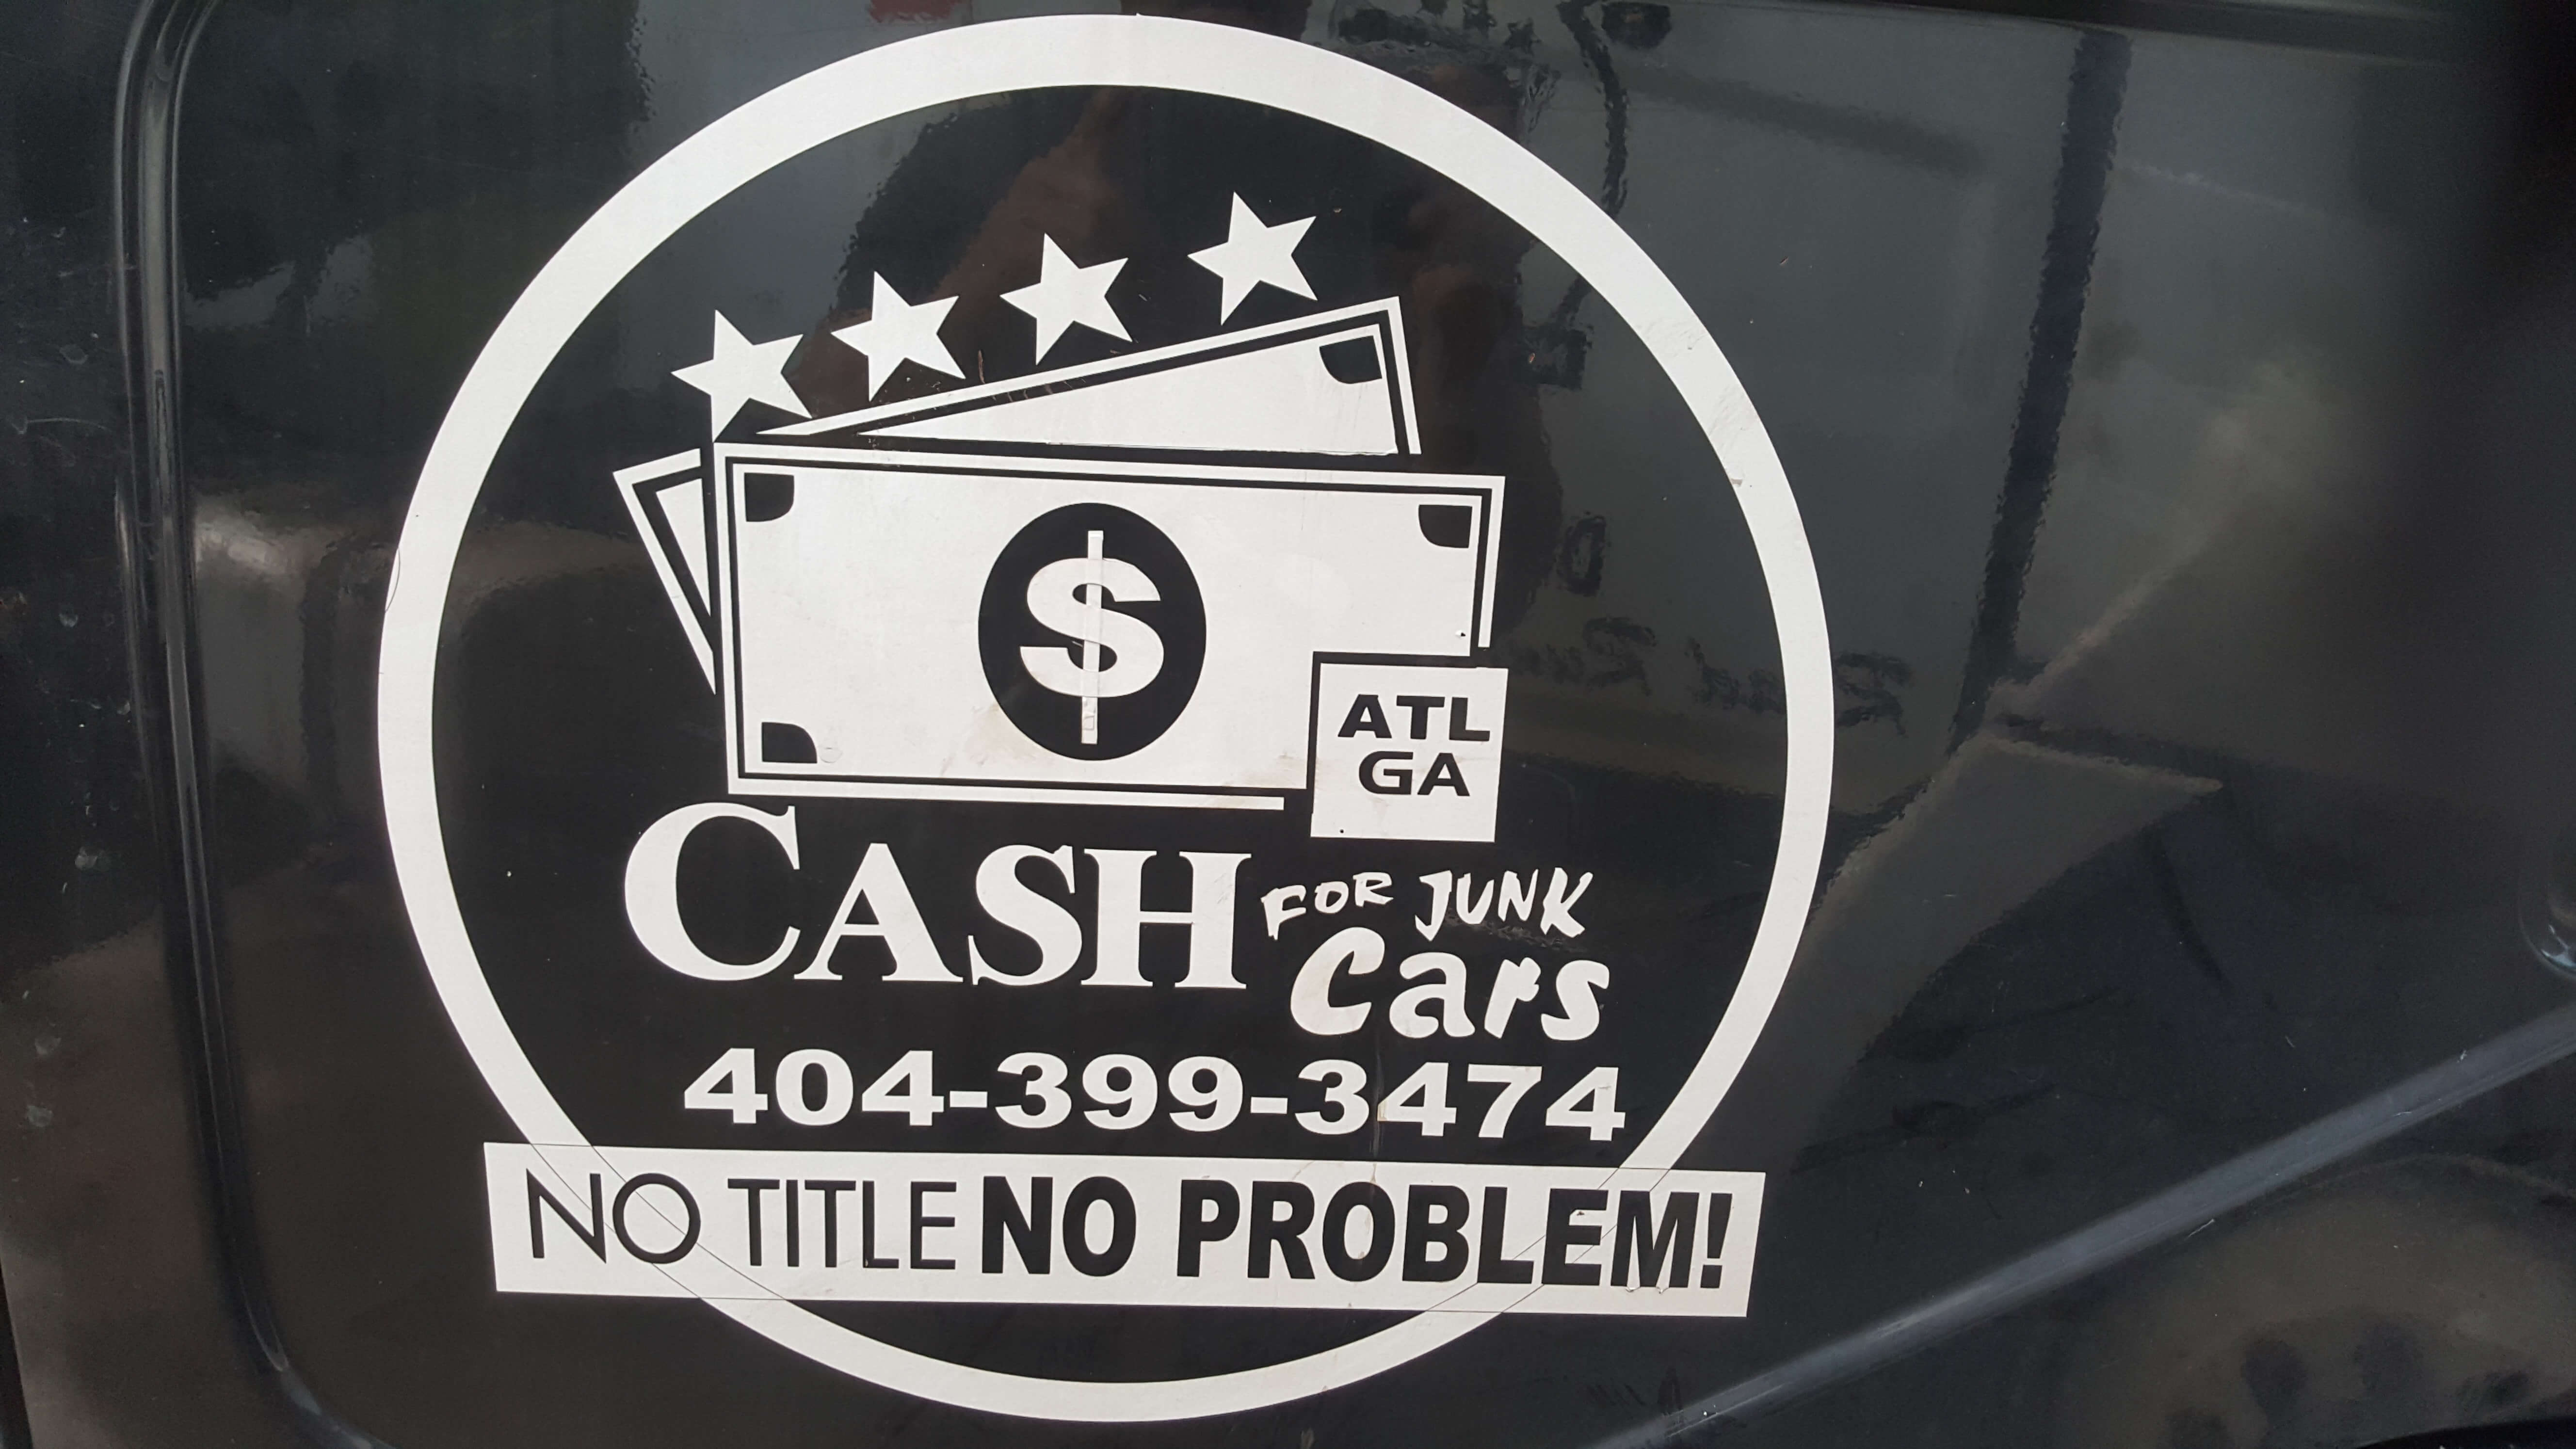 Car Crushers Cash For Cars w/o Titles 404-399-3474 Call Now - 